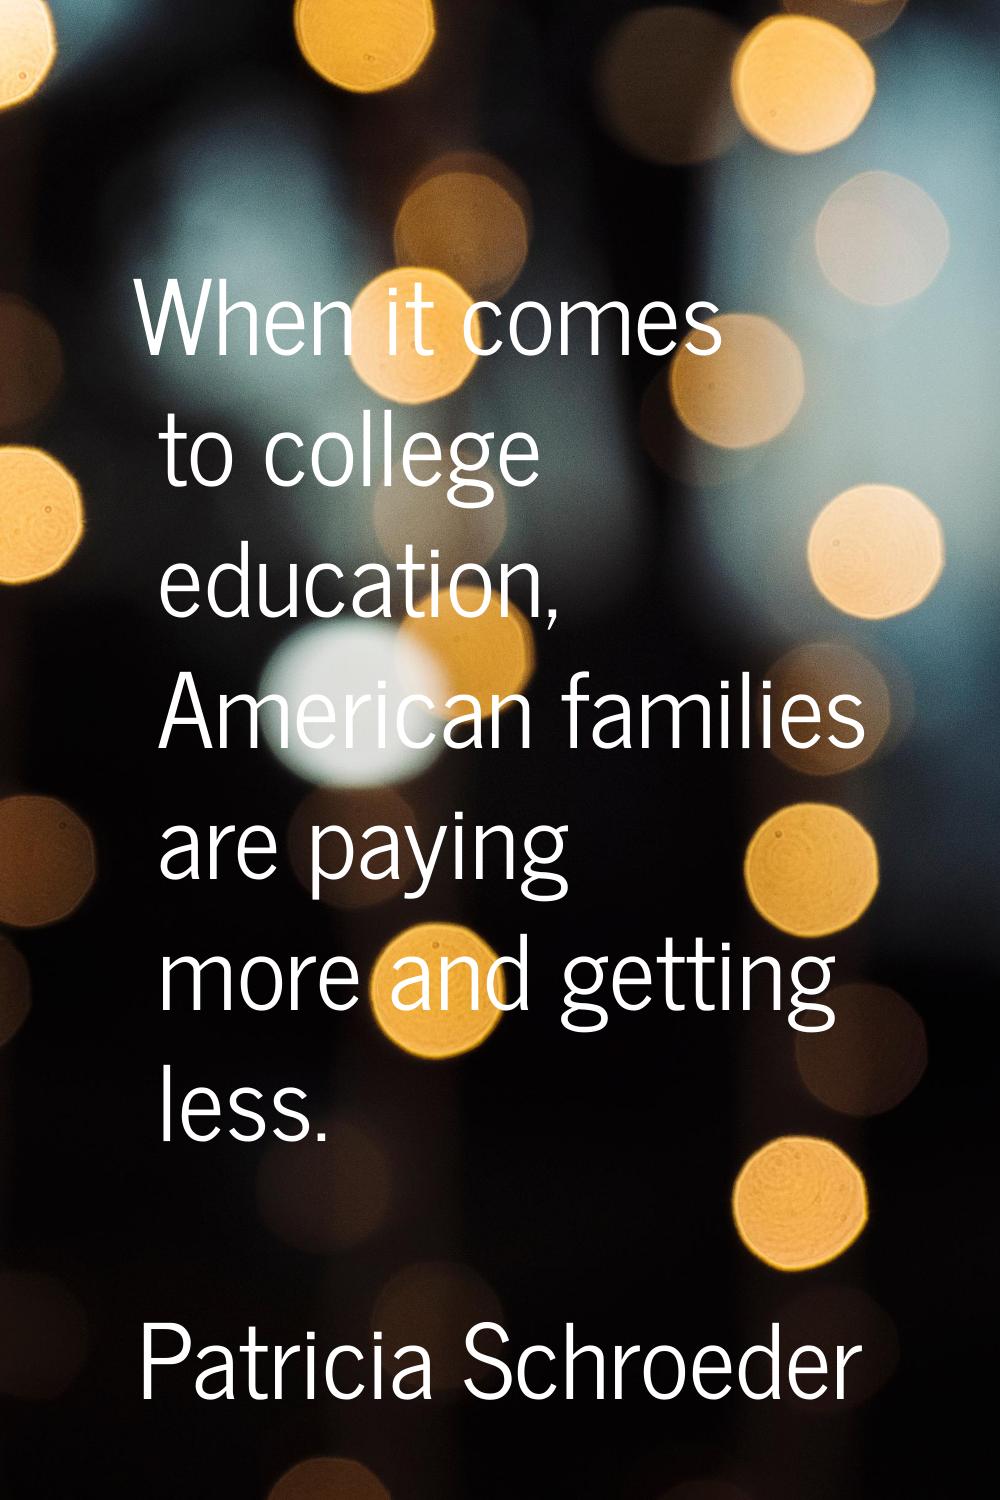 When it comes to college education, American families are paying more and getting less.